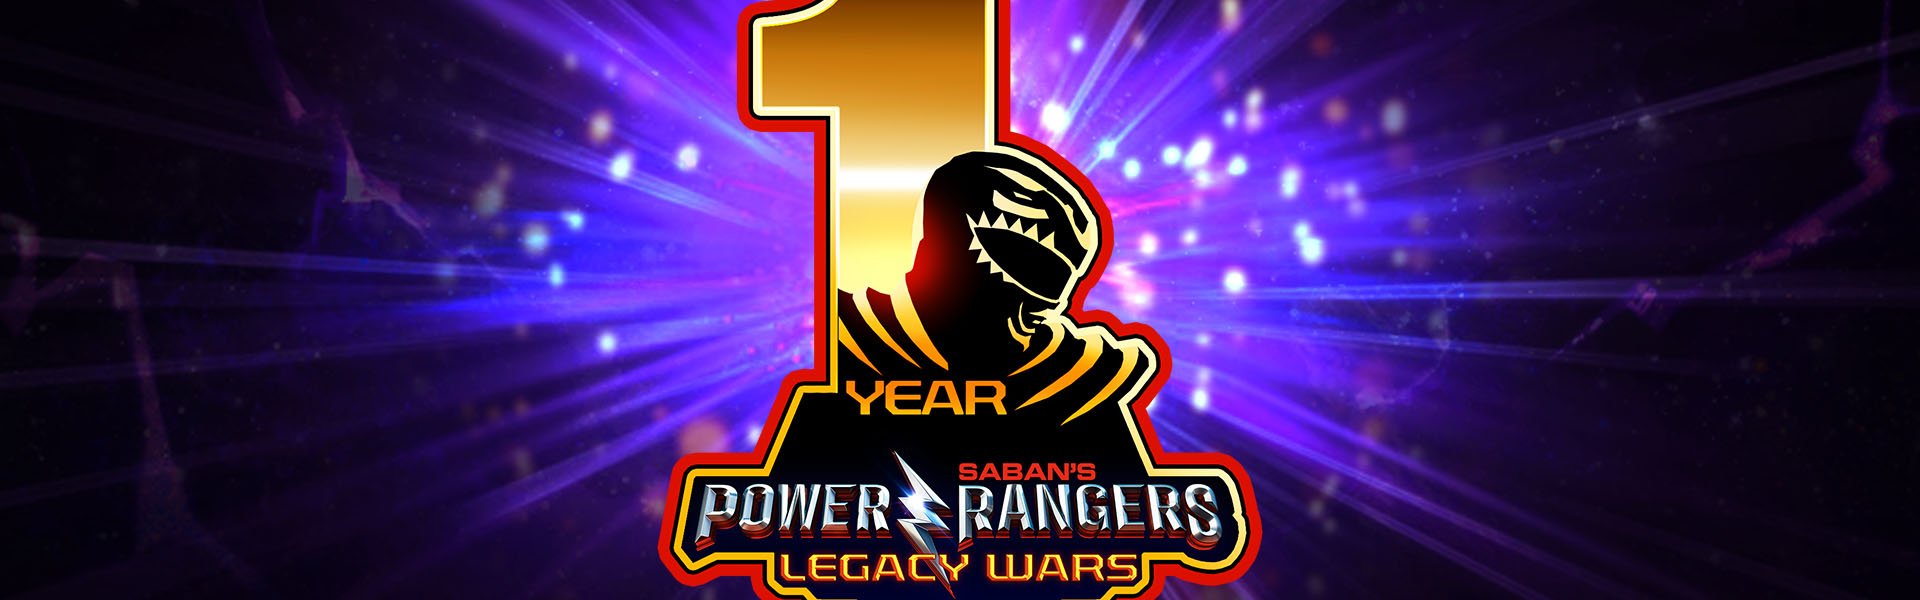 nWay Celebrates First Anniversary of Power Rangers: Legacy Wars 17